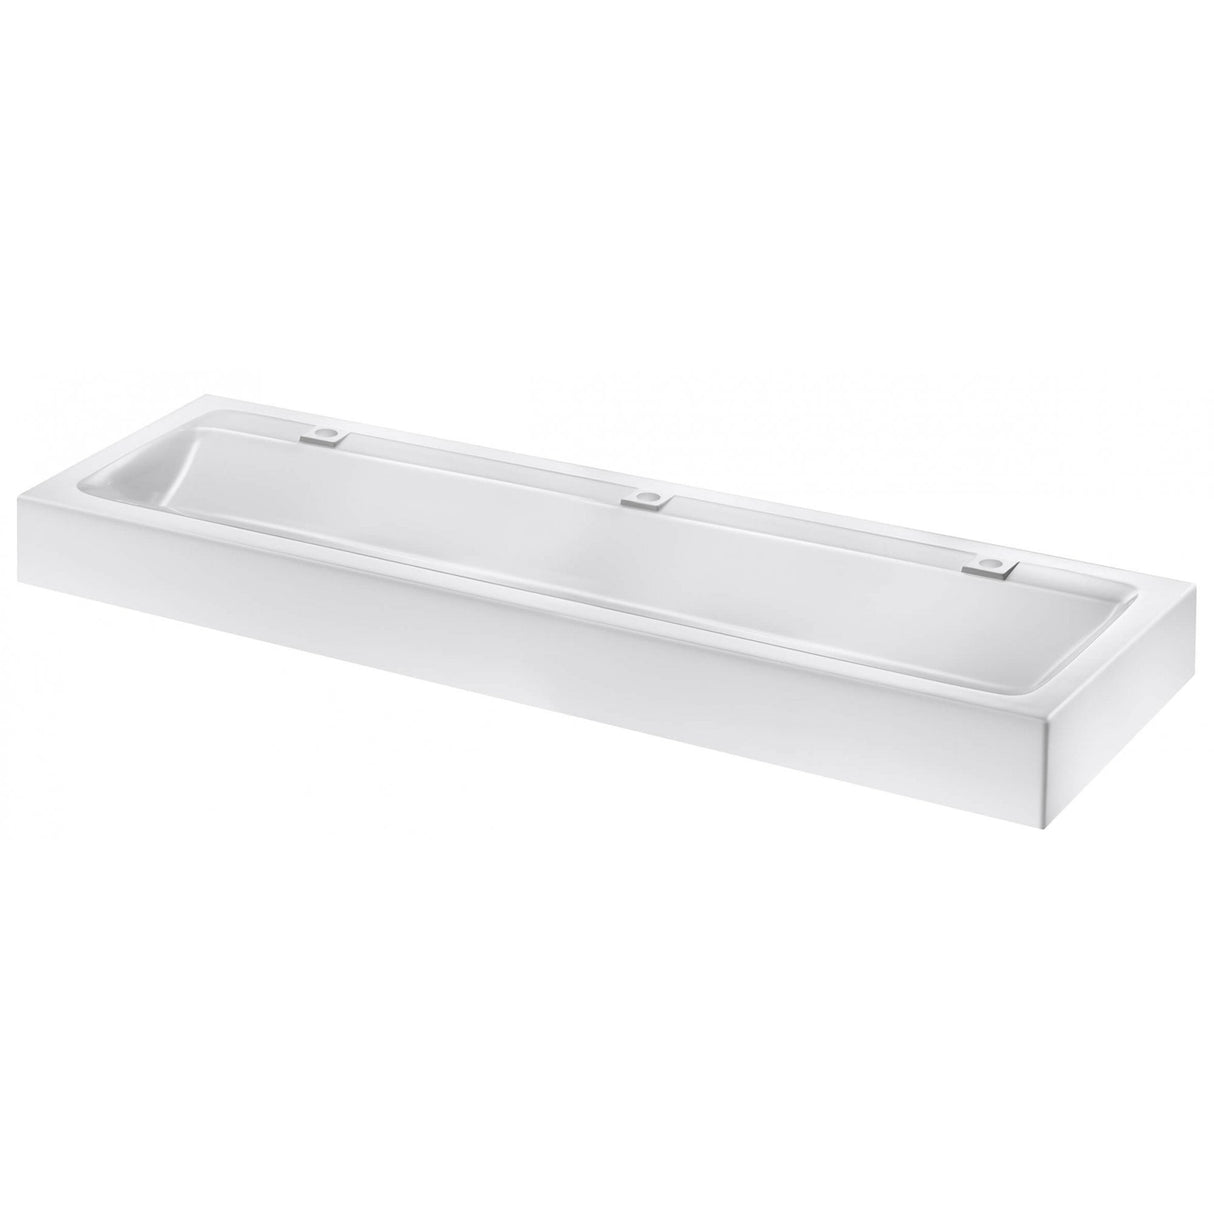 MINERALCAST Wall-Mounted Wash Trough L.1800mm with 3 x Ø35mm tap holes 454182